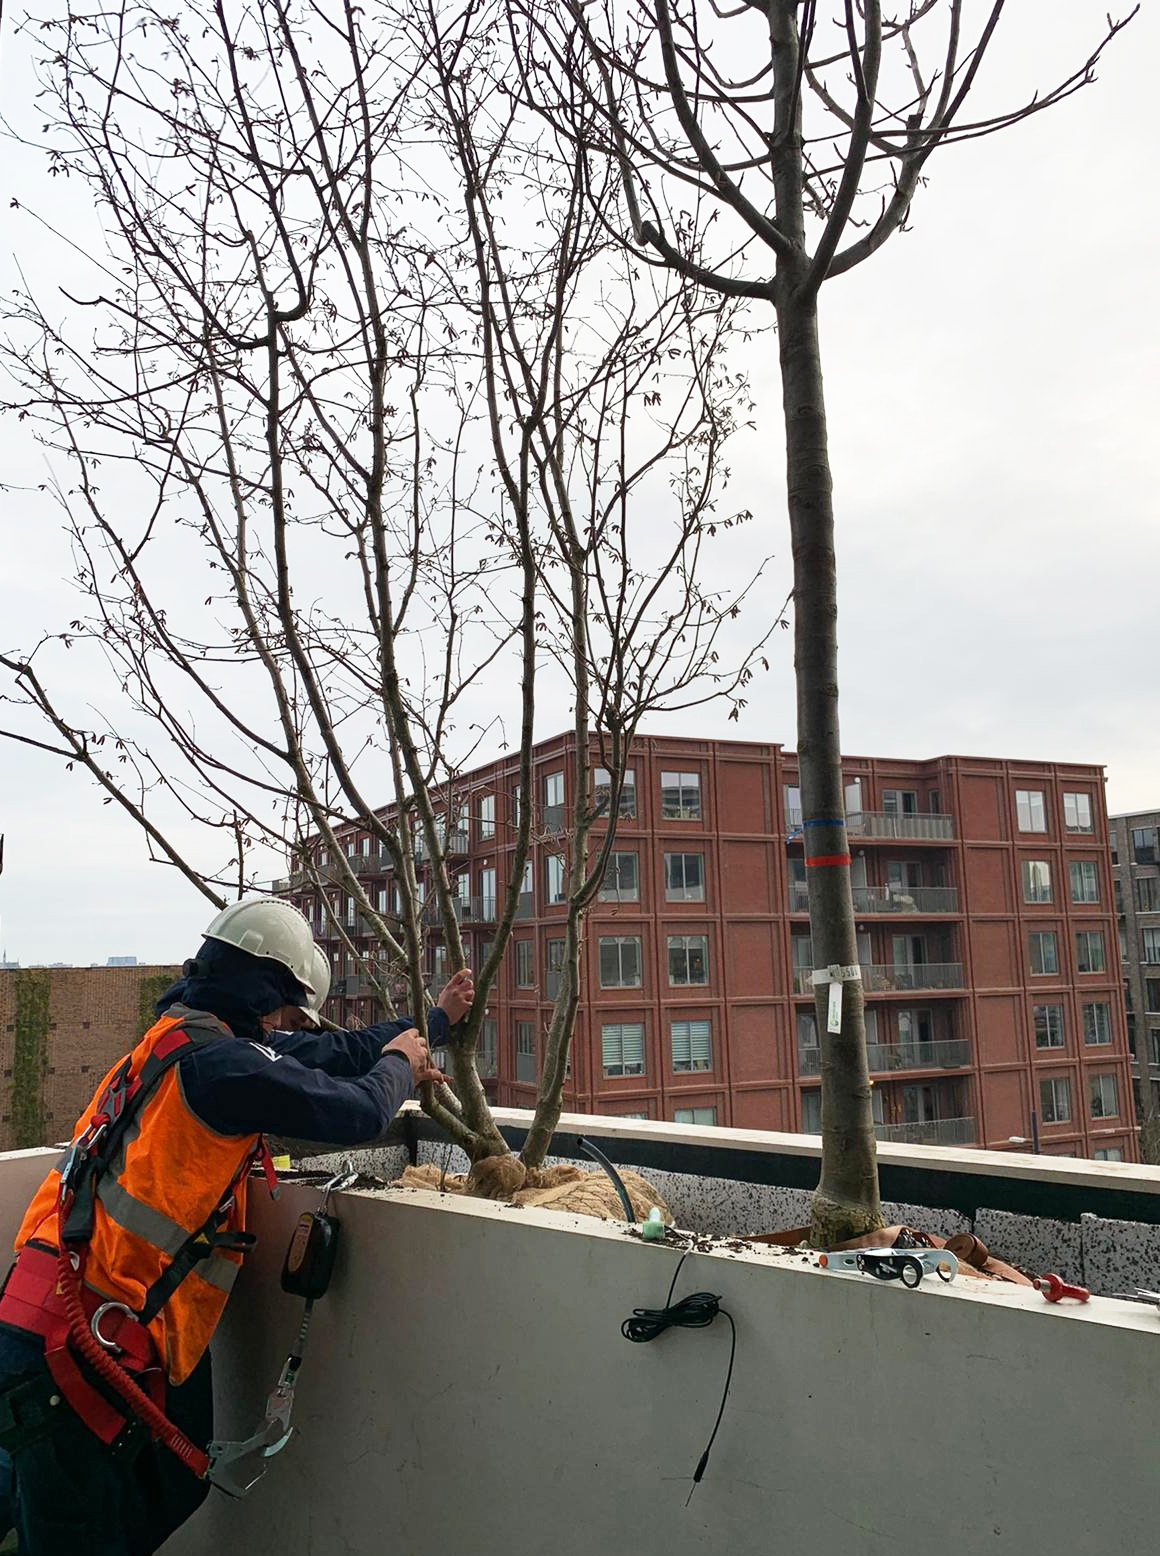 The root balls of the trees are anchored to the planters and steel wire is used to secure the trees to the building. The trees are planted in a specially composed substrate.